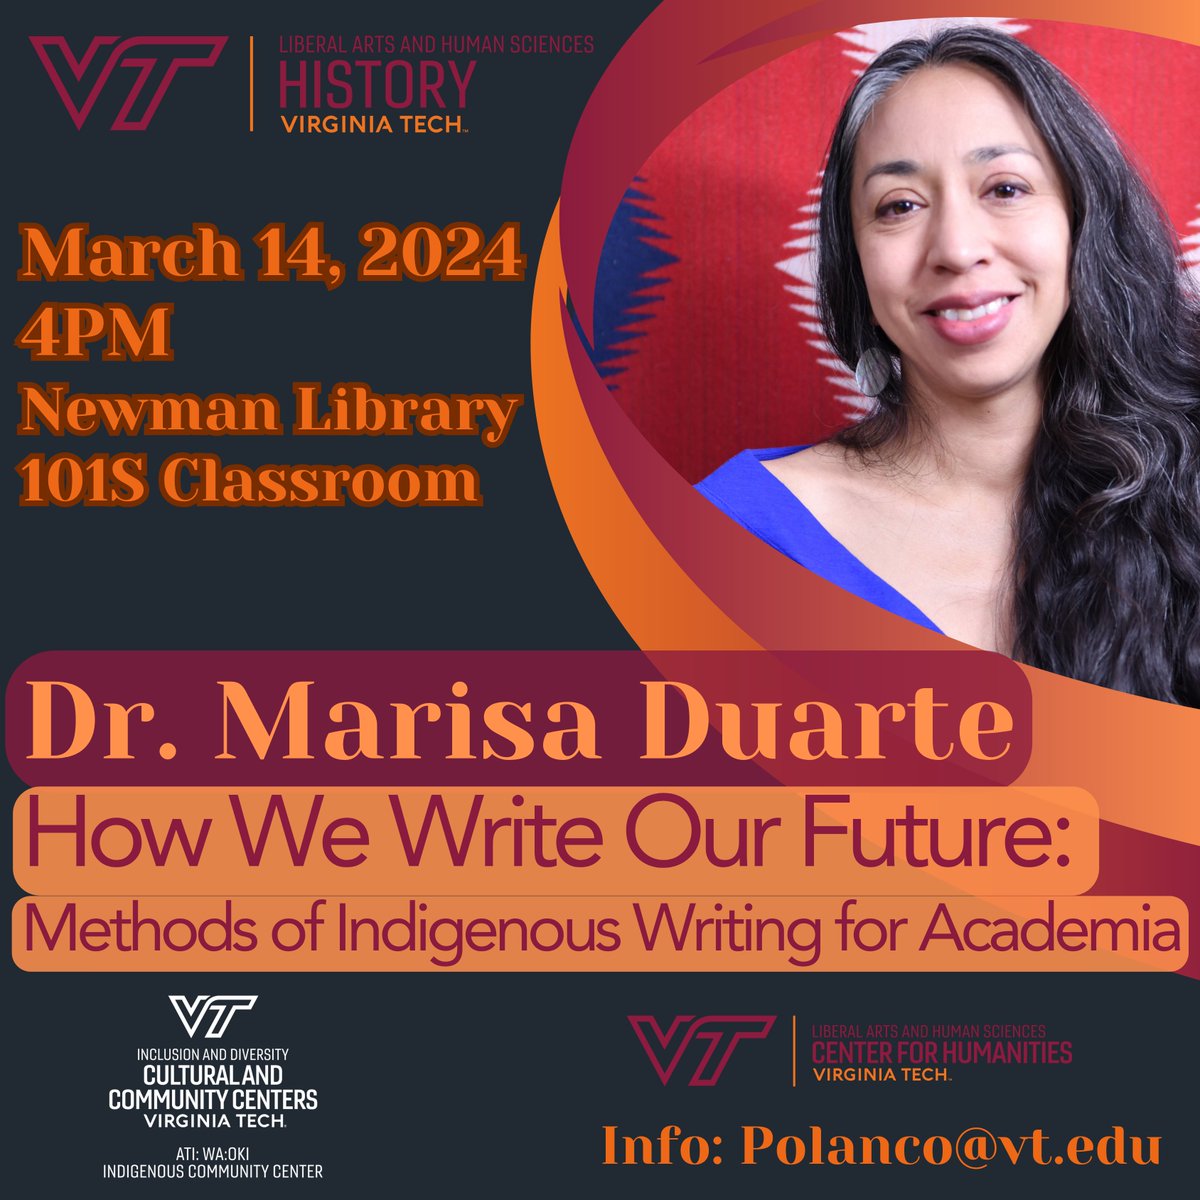 Join us for a public lecture by Marisa Duarte at 4 p.m. on March 14 in Newman Library's 101S classroom. Duarte, a citizen of the Pascua Yaqui Nation, is an associate professor at Arizona State University in the School of Social Transformation. We hope to see you there!